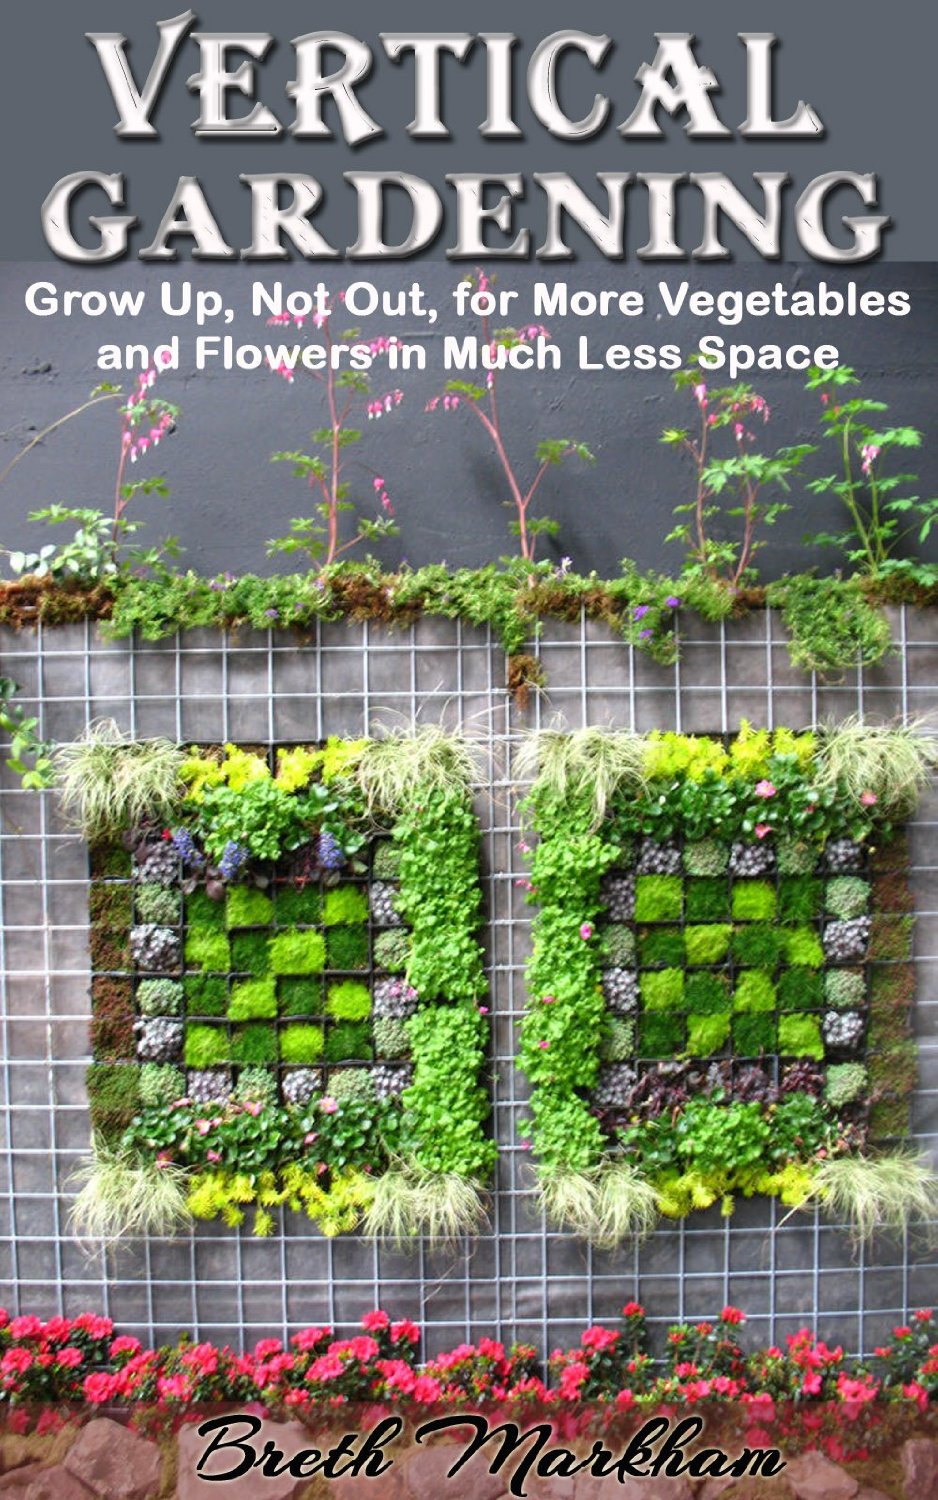 Vertical Gardening: Grow Up, Not Out, for More Vegetables and Flowers in Much Less Space by Thohir Wijaya